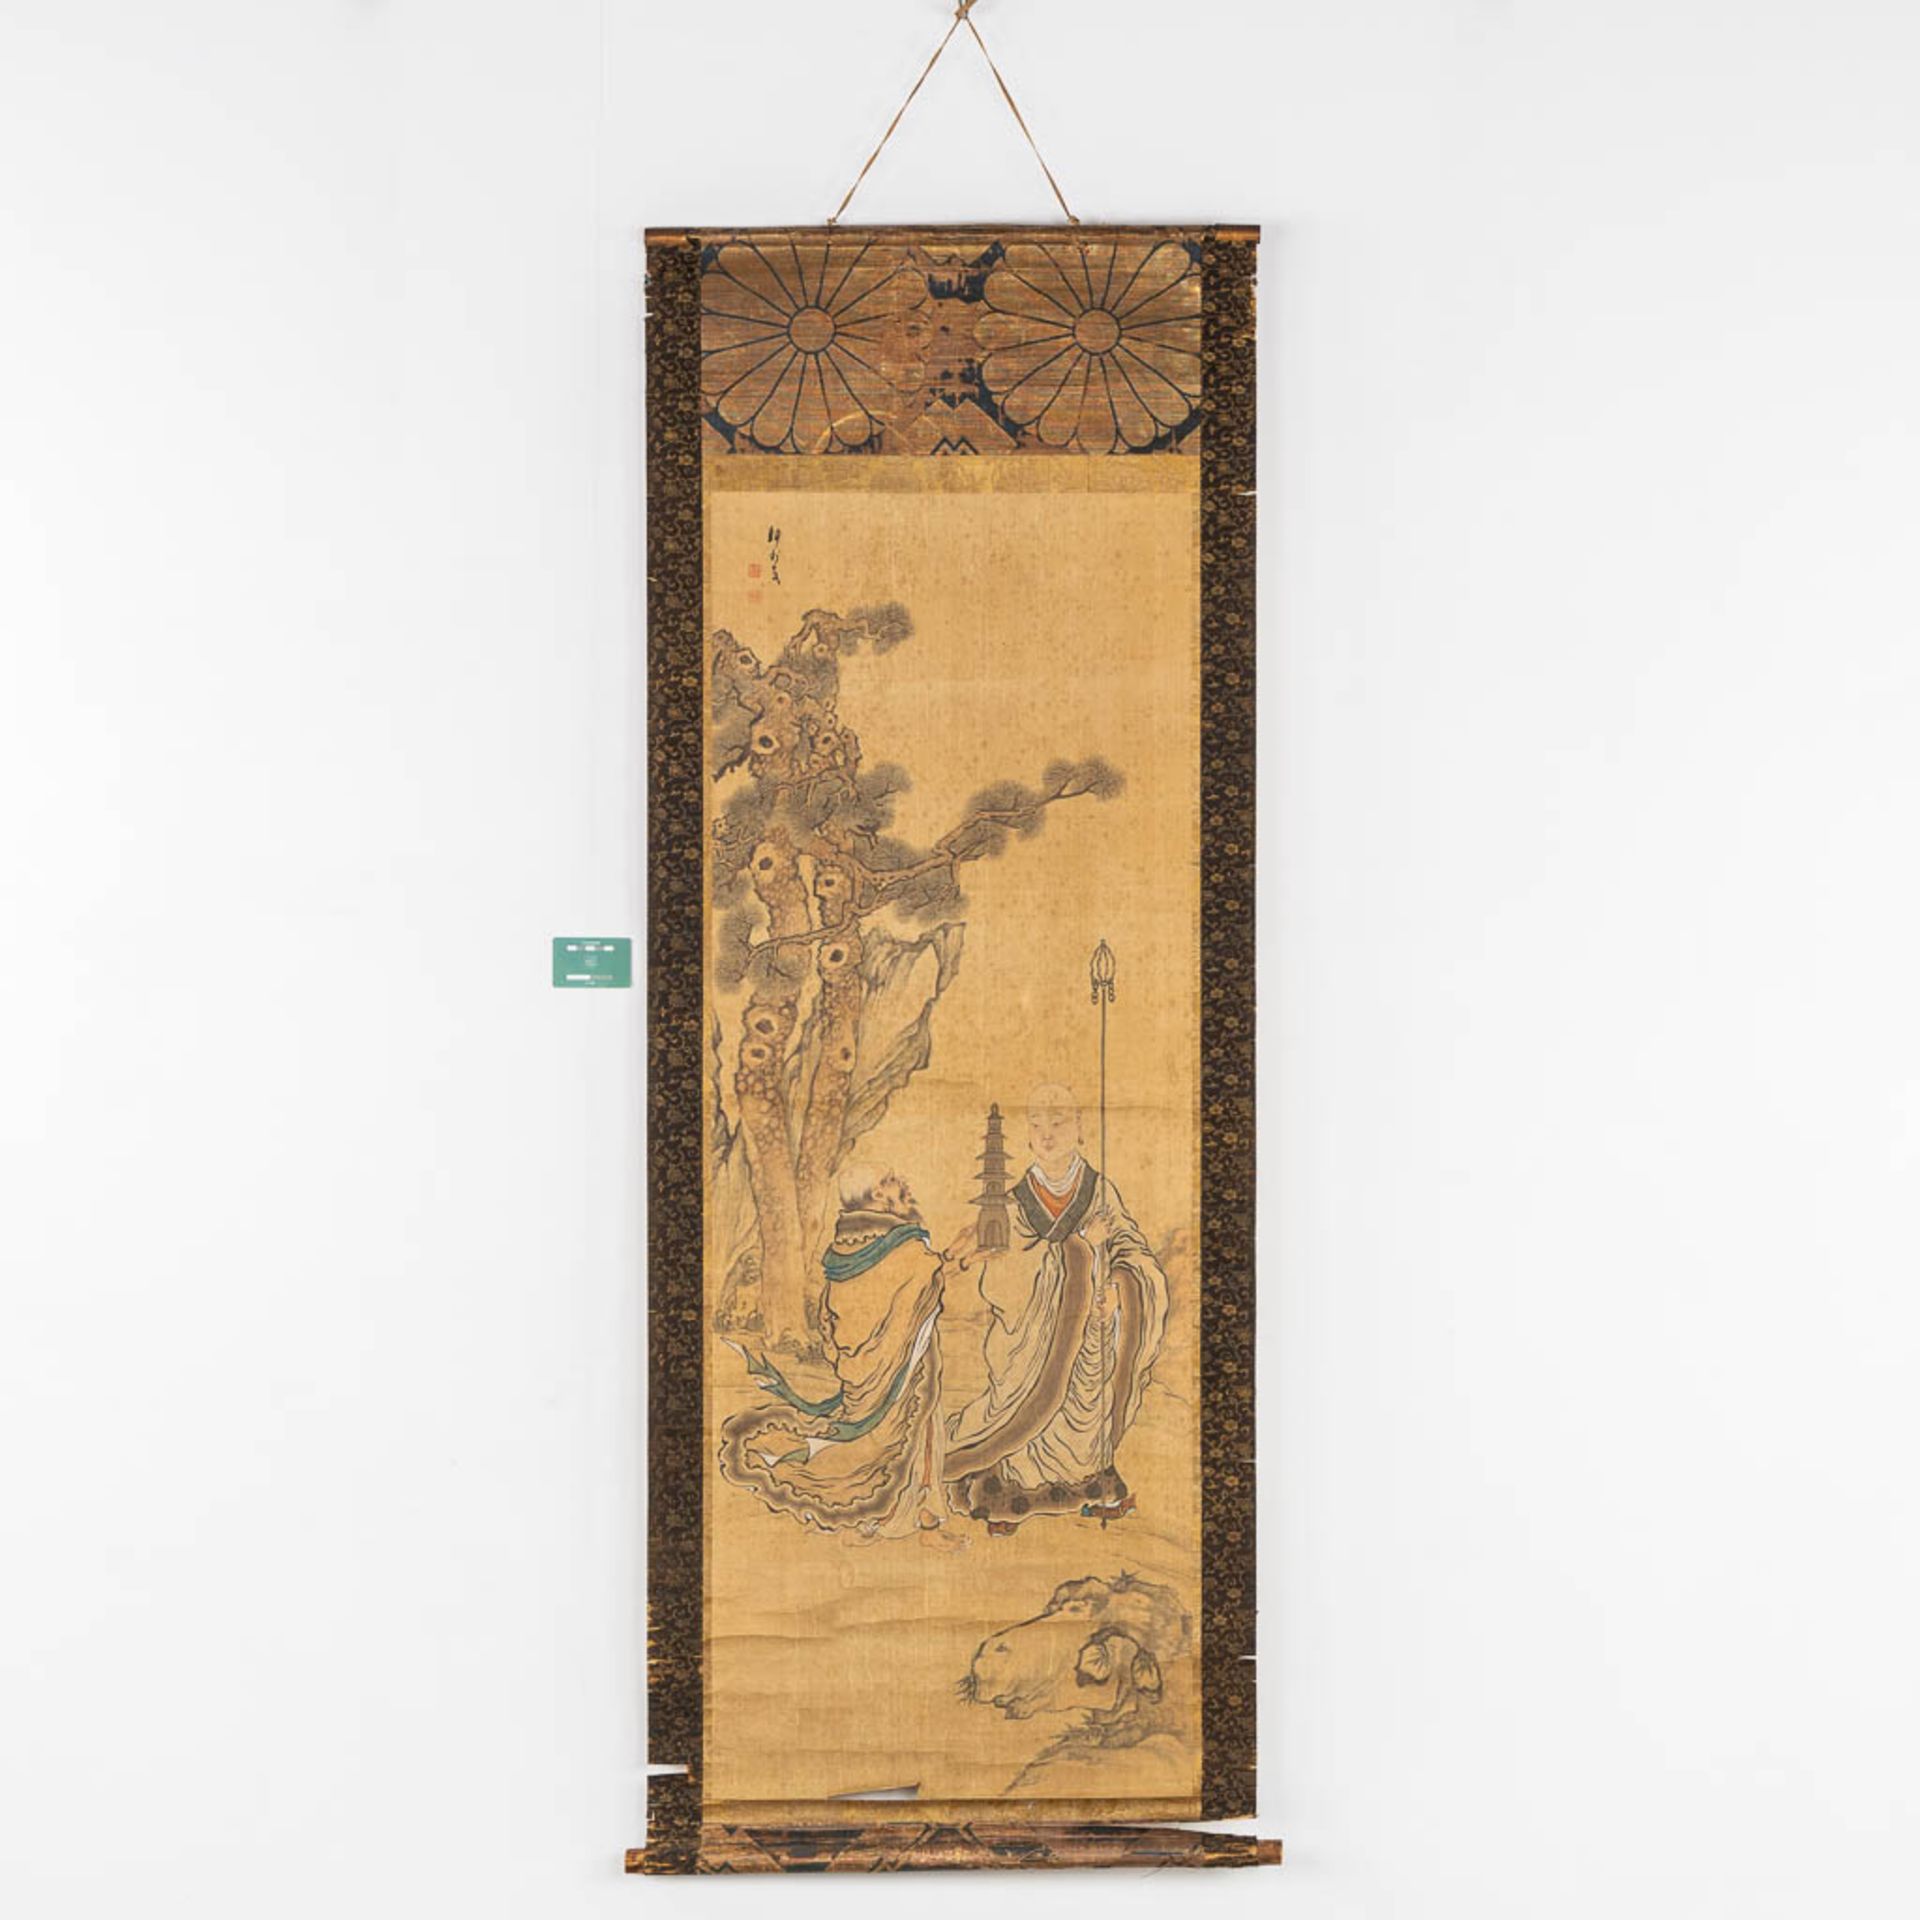 A Chinese scroll, depicting a wise man and his desciple. 19th C. (W:57 x H:180 cm) - Image 2 of 9